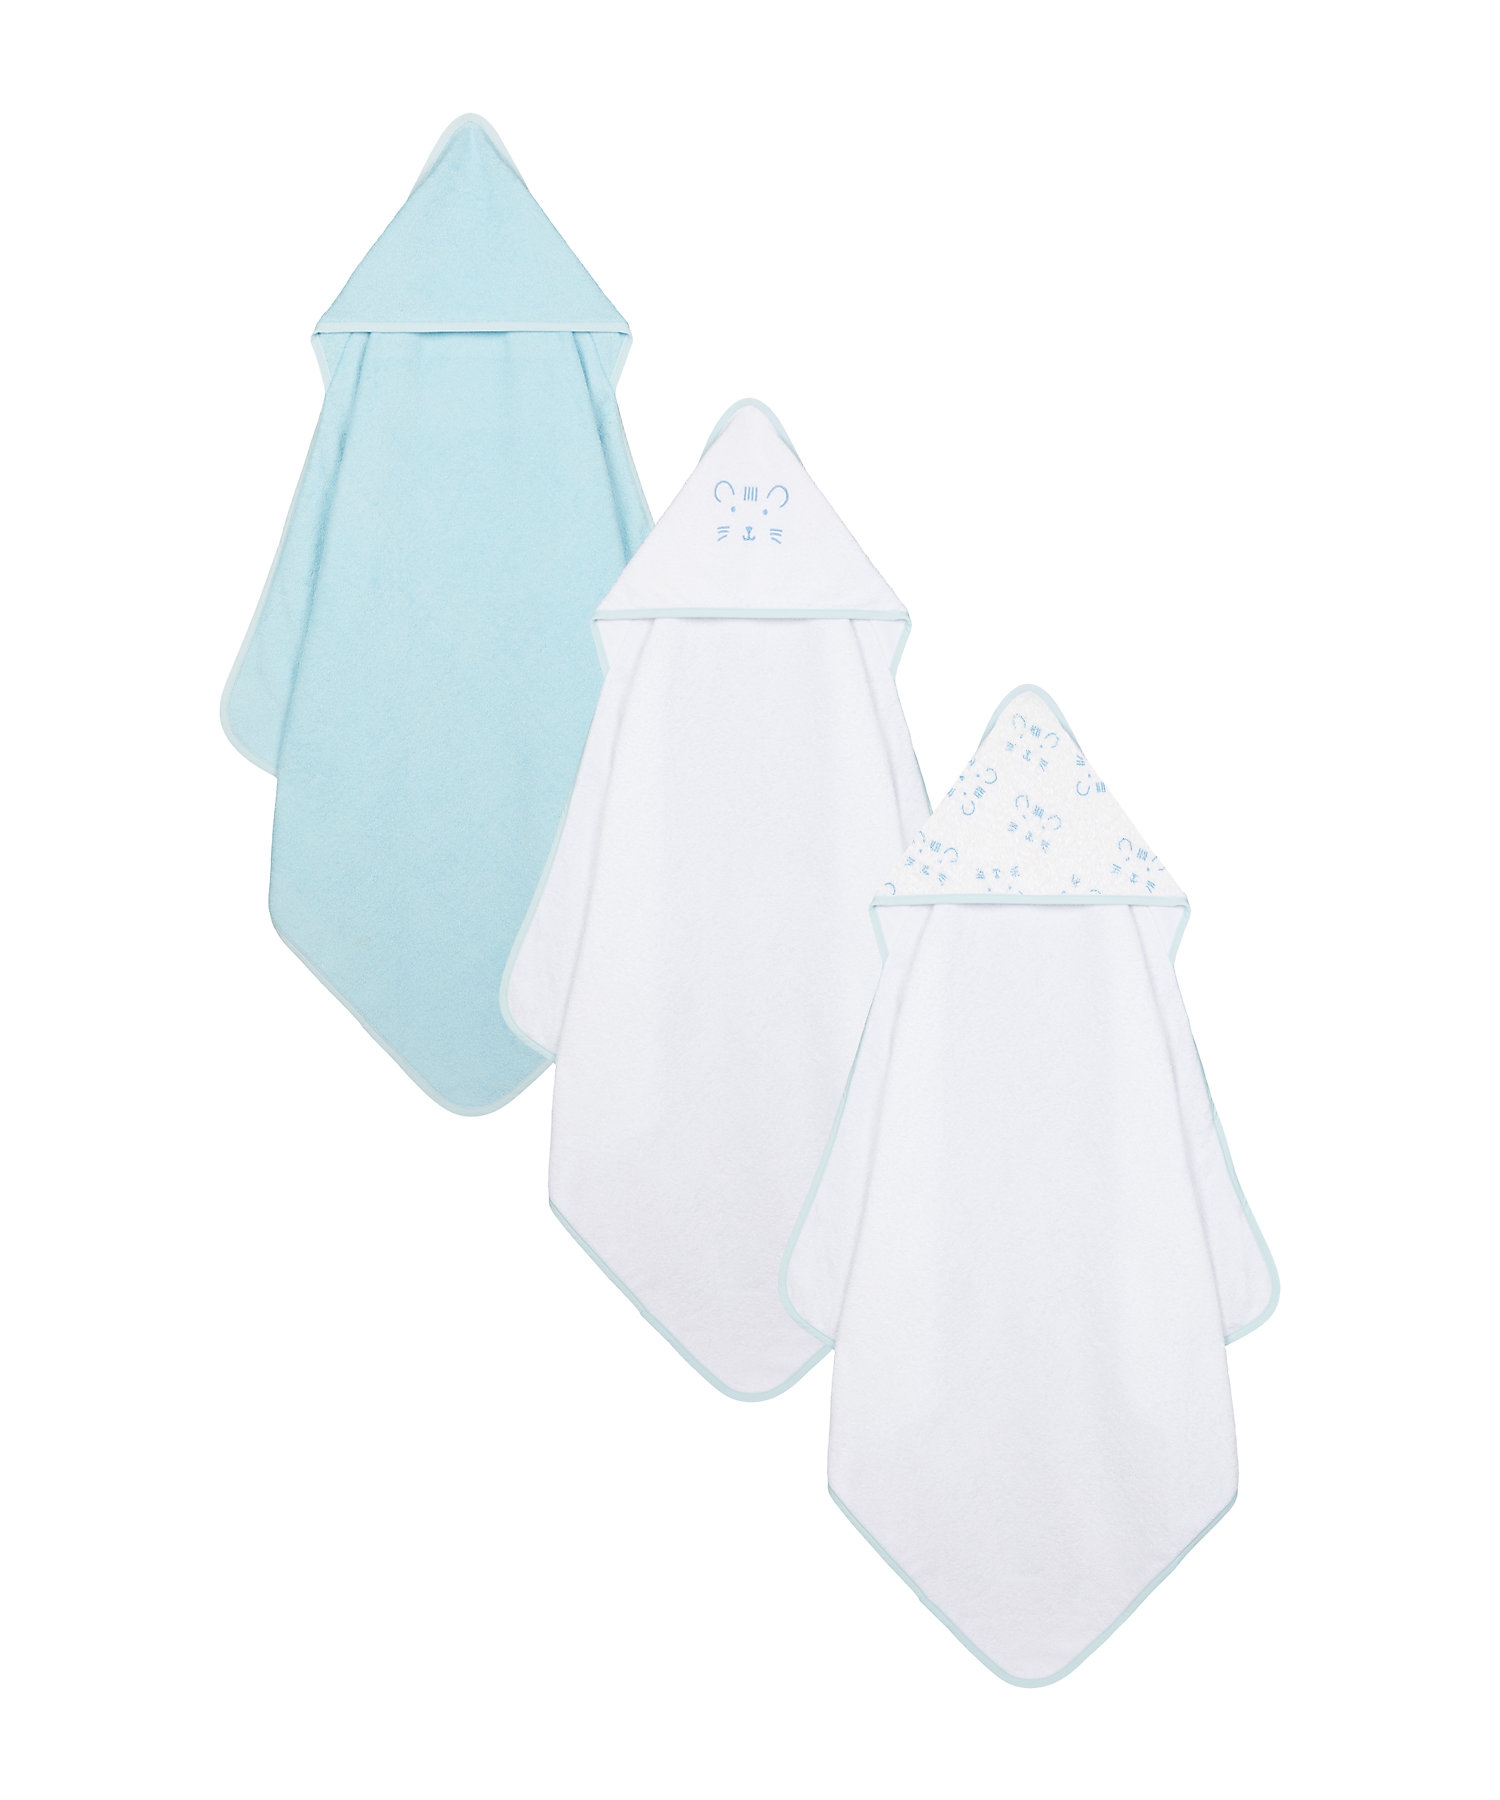 Mothercare | Mothercare 3 pack Cuddle and Dry Baby Towels Blue